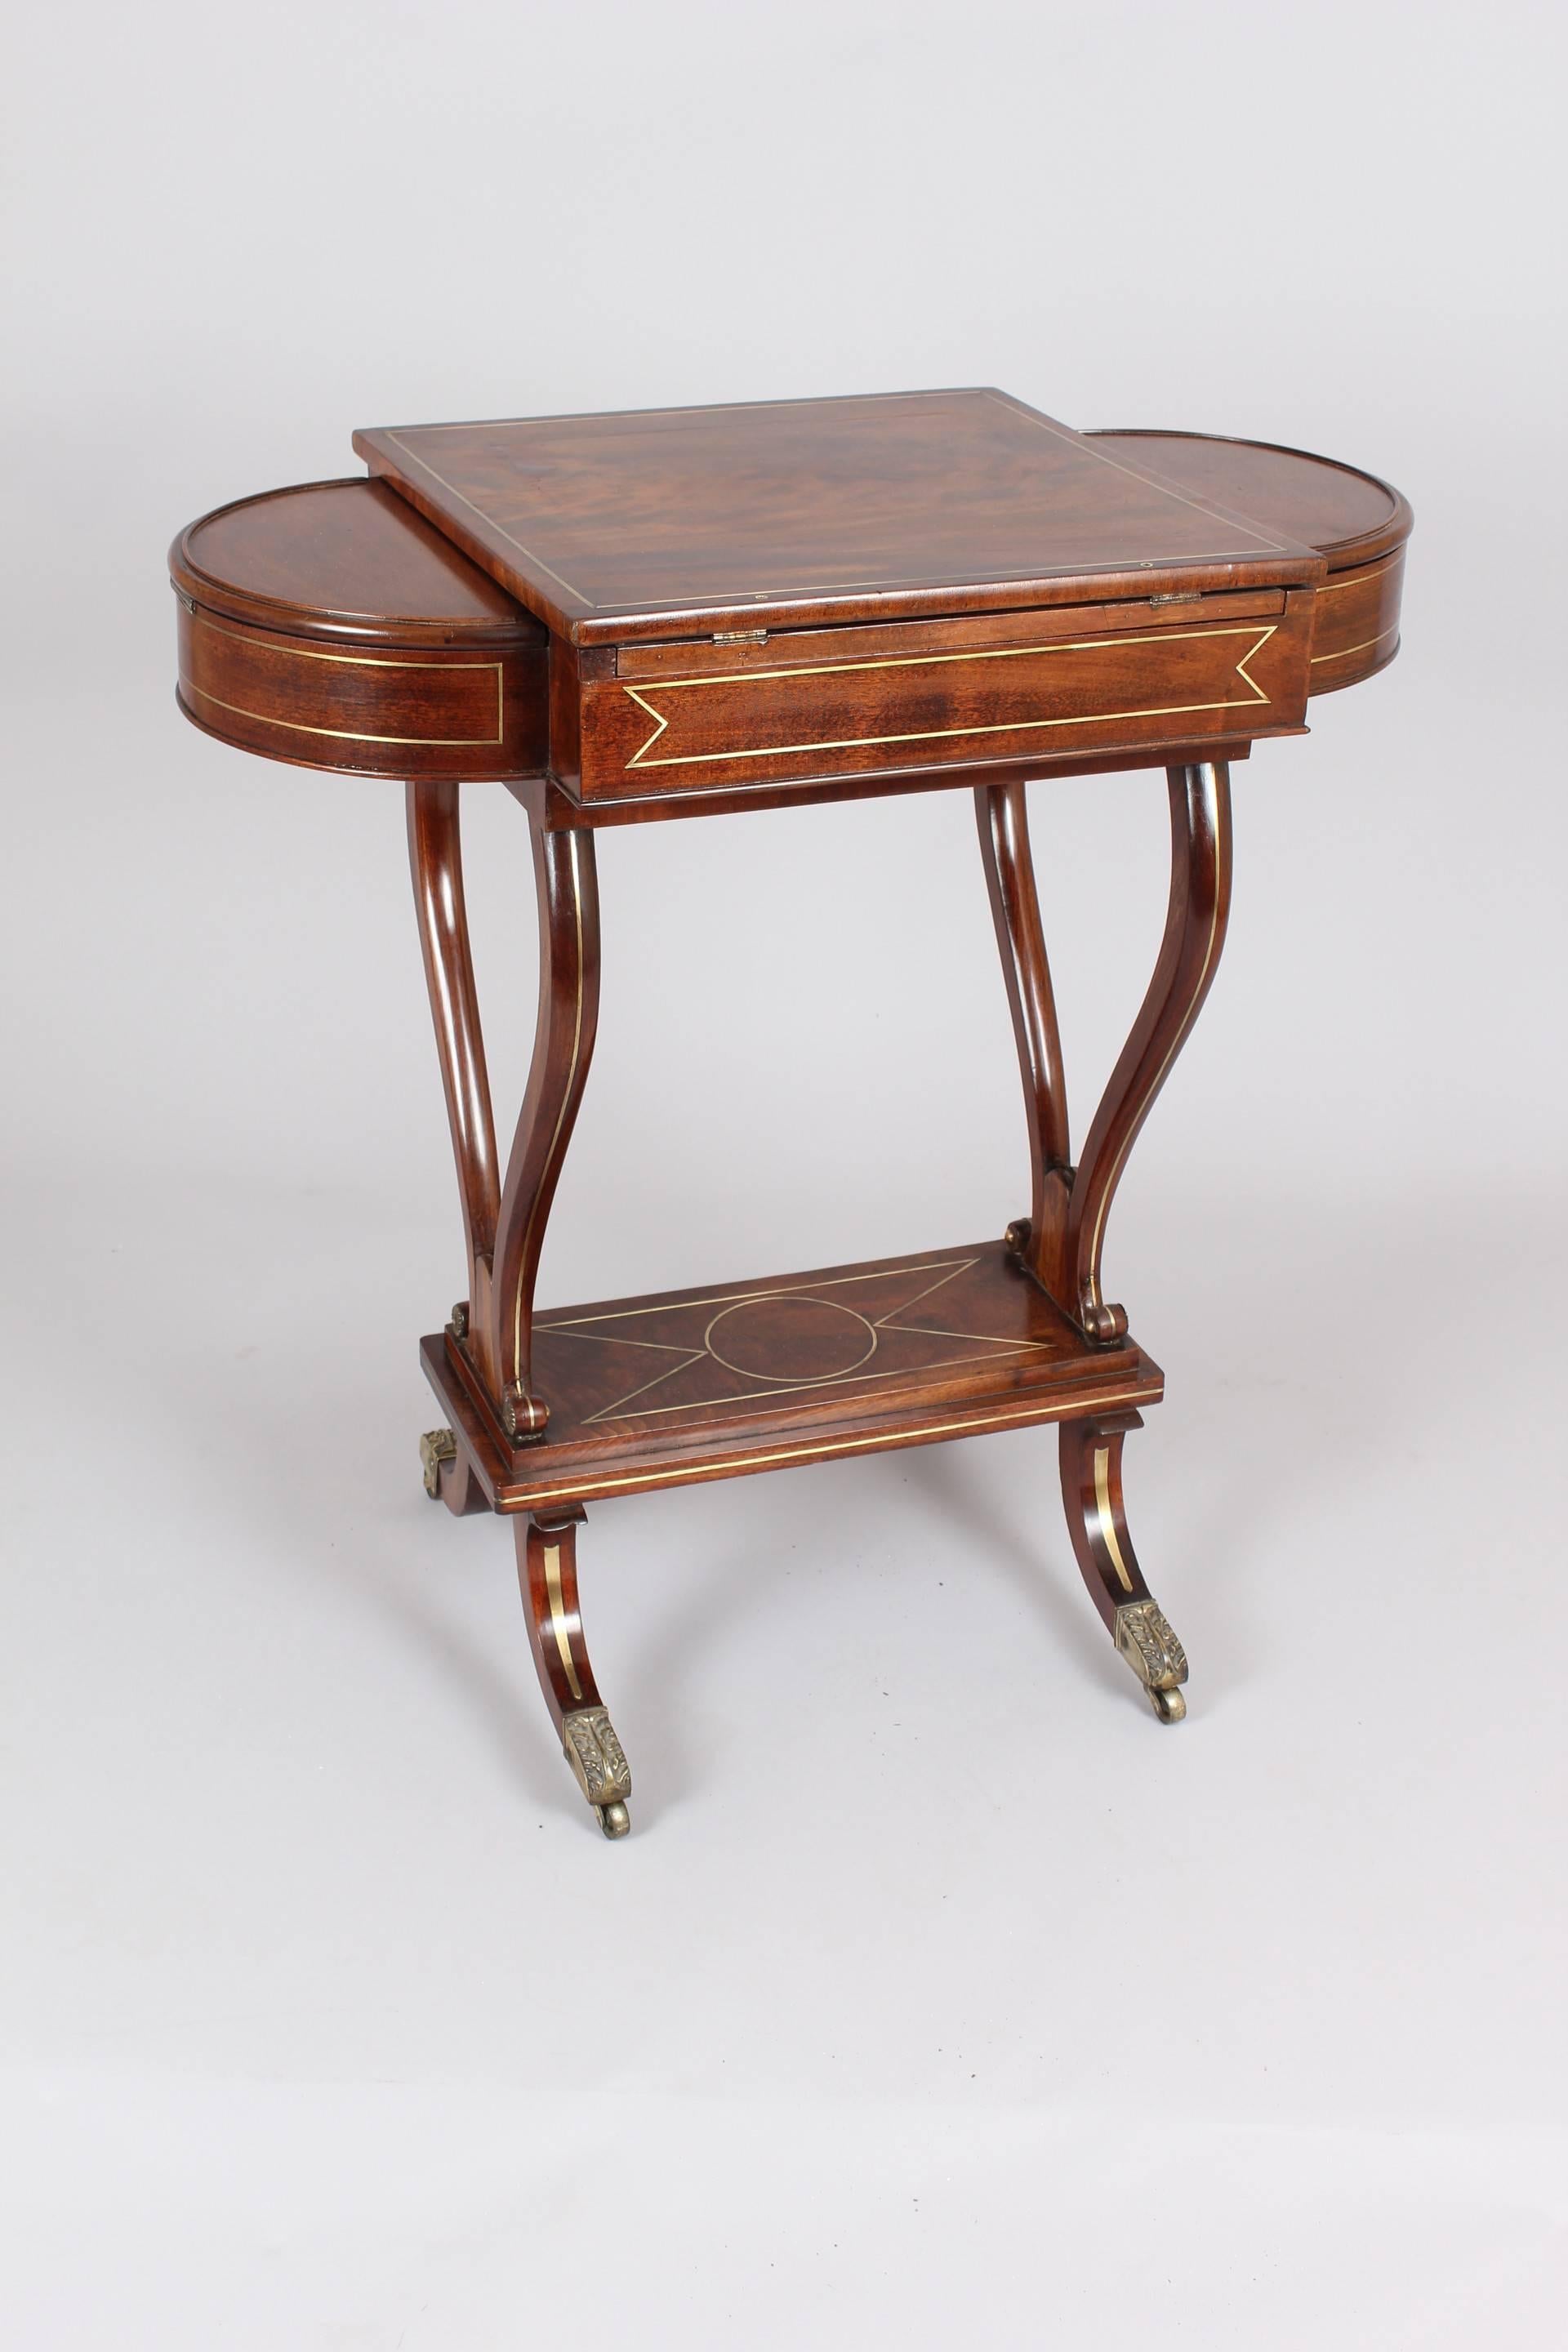 Regency mahogany and brass inlaid work-table; the hinged and adjustable top sliding forward to reveal a multi-compartmented interior and flanked by semi-circular boxes with hinged lids; on scrolled end-supports and a central platform with sabre legs